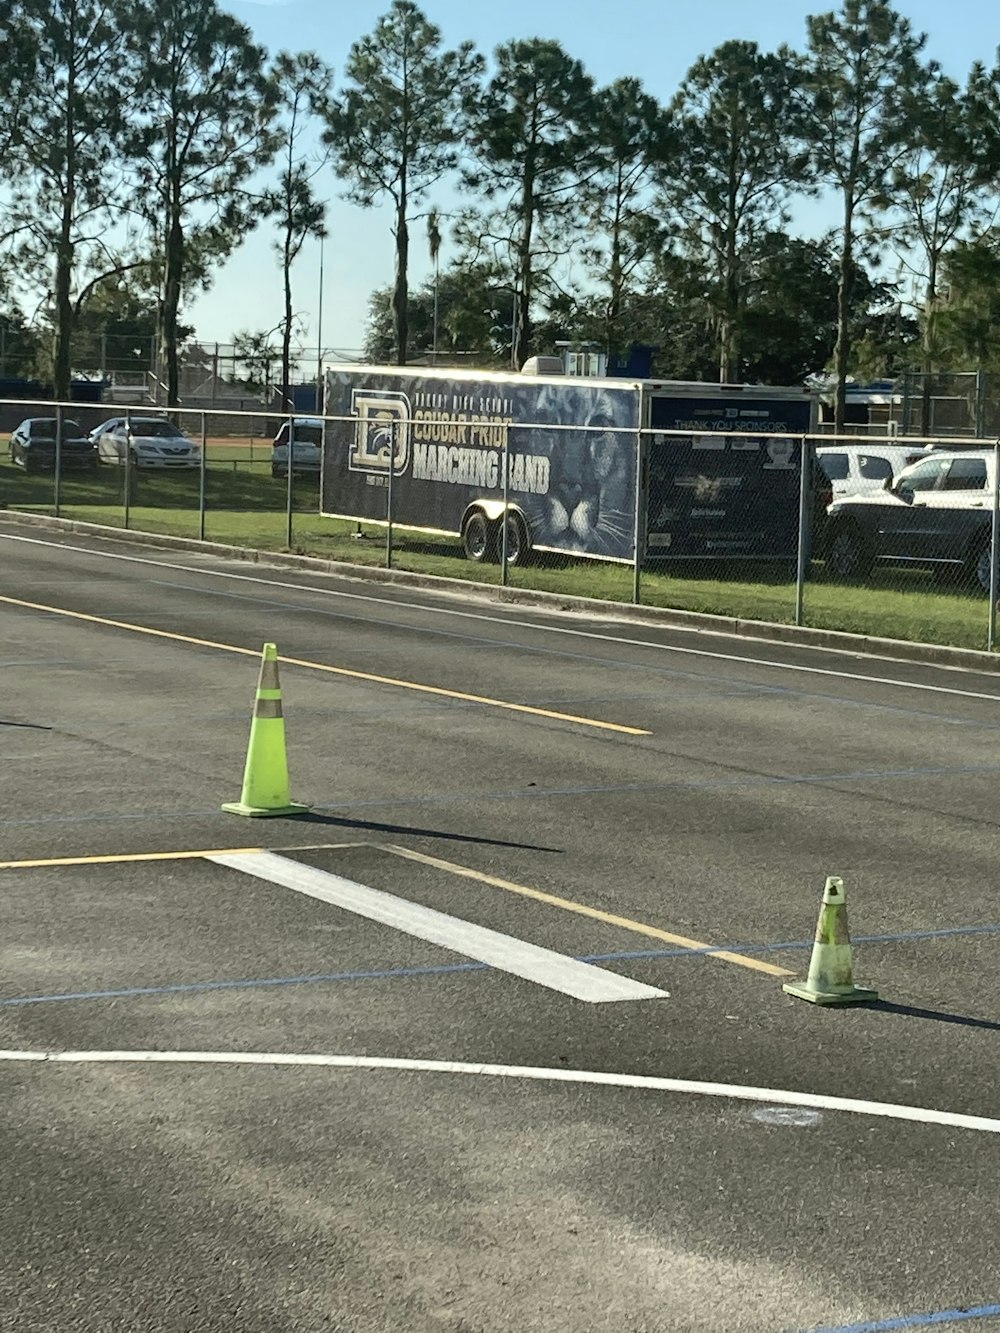 a parking lot with a fence and a truck in the background